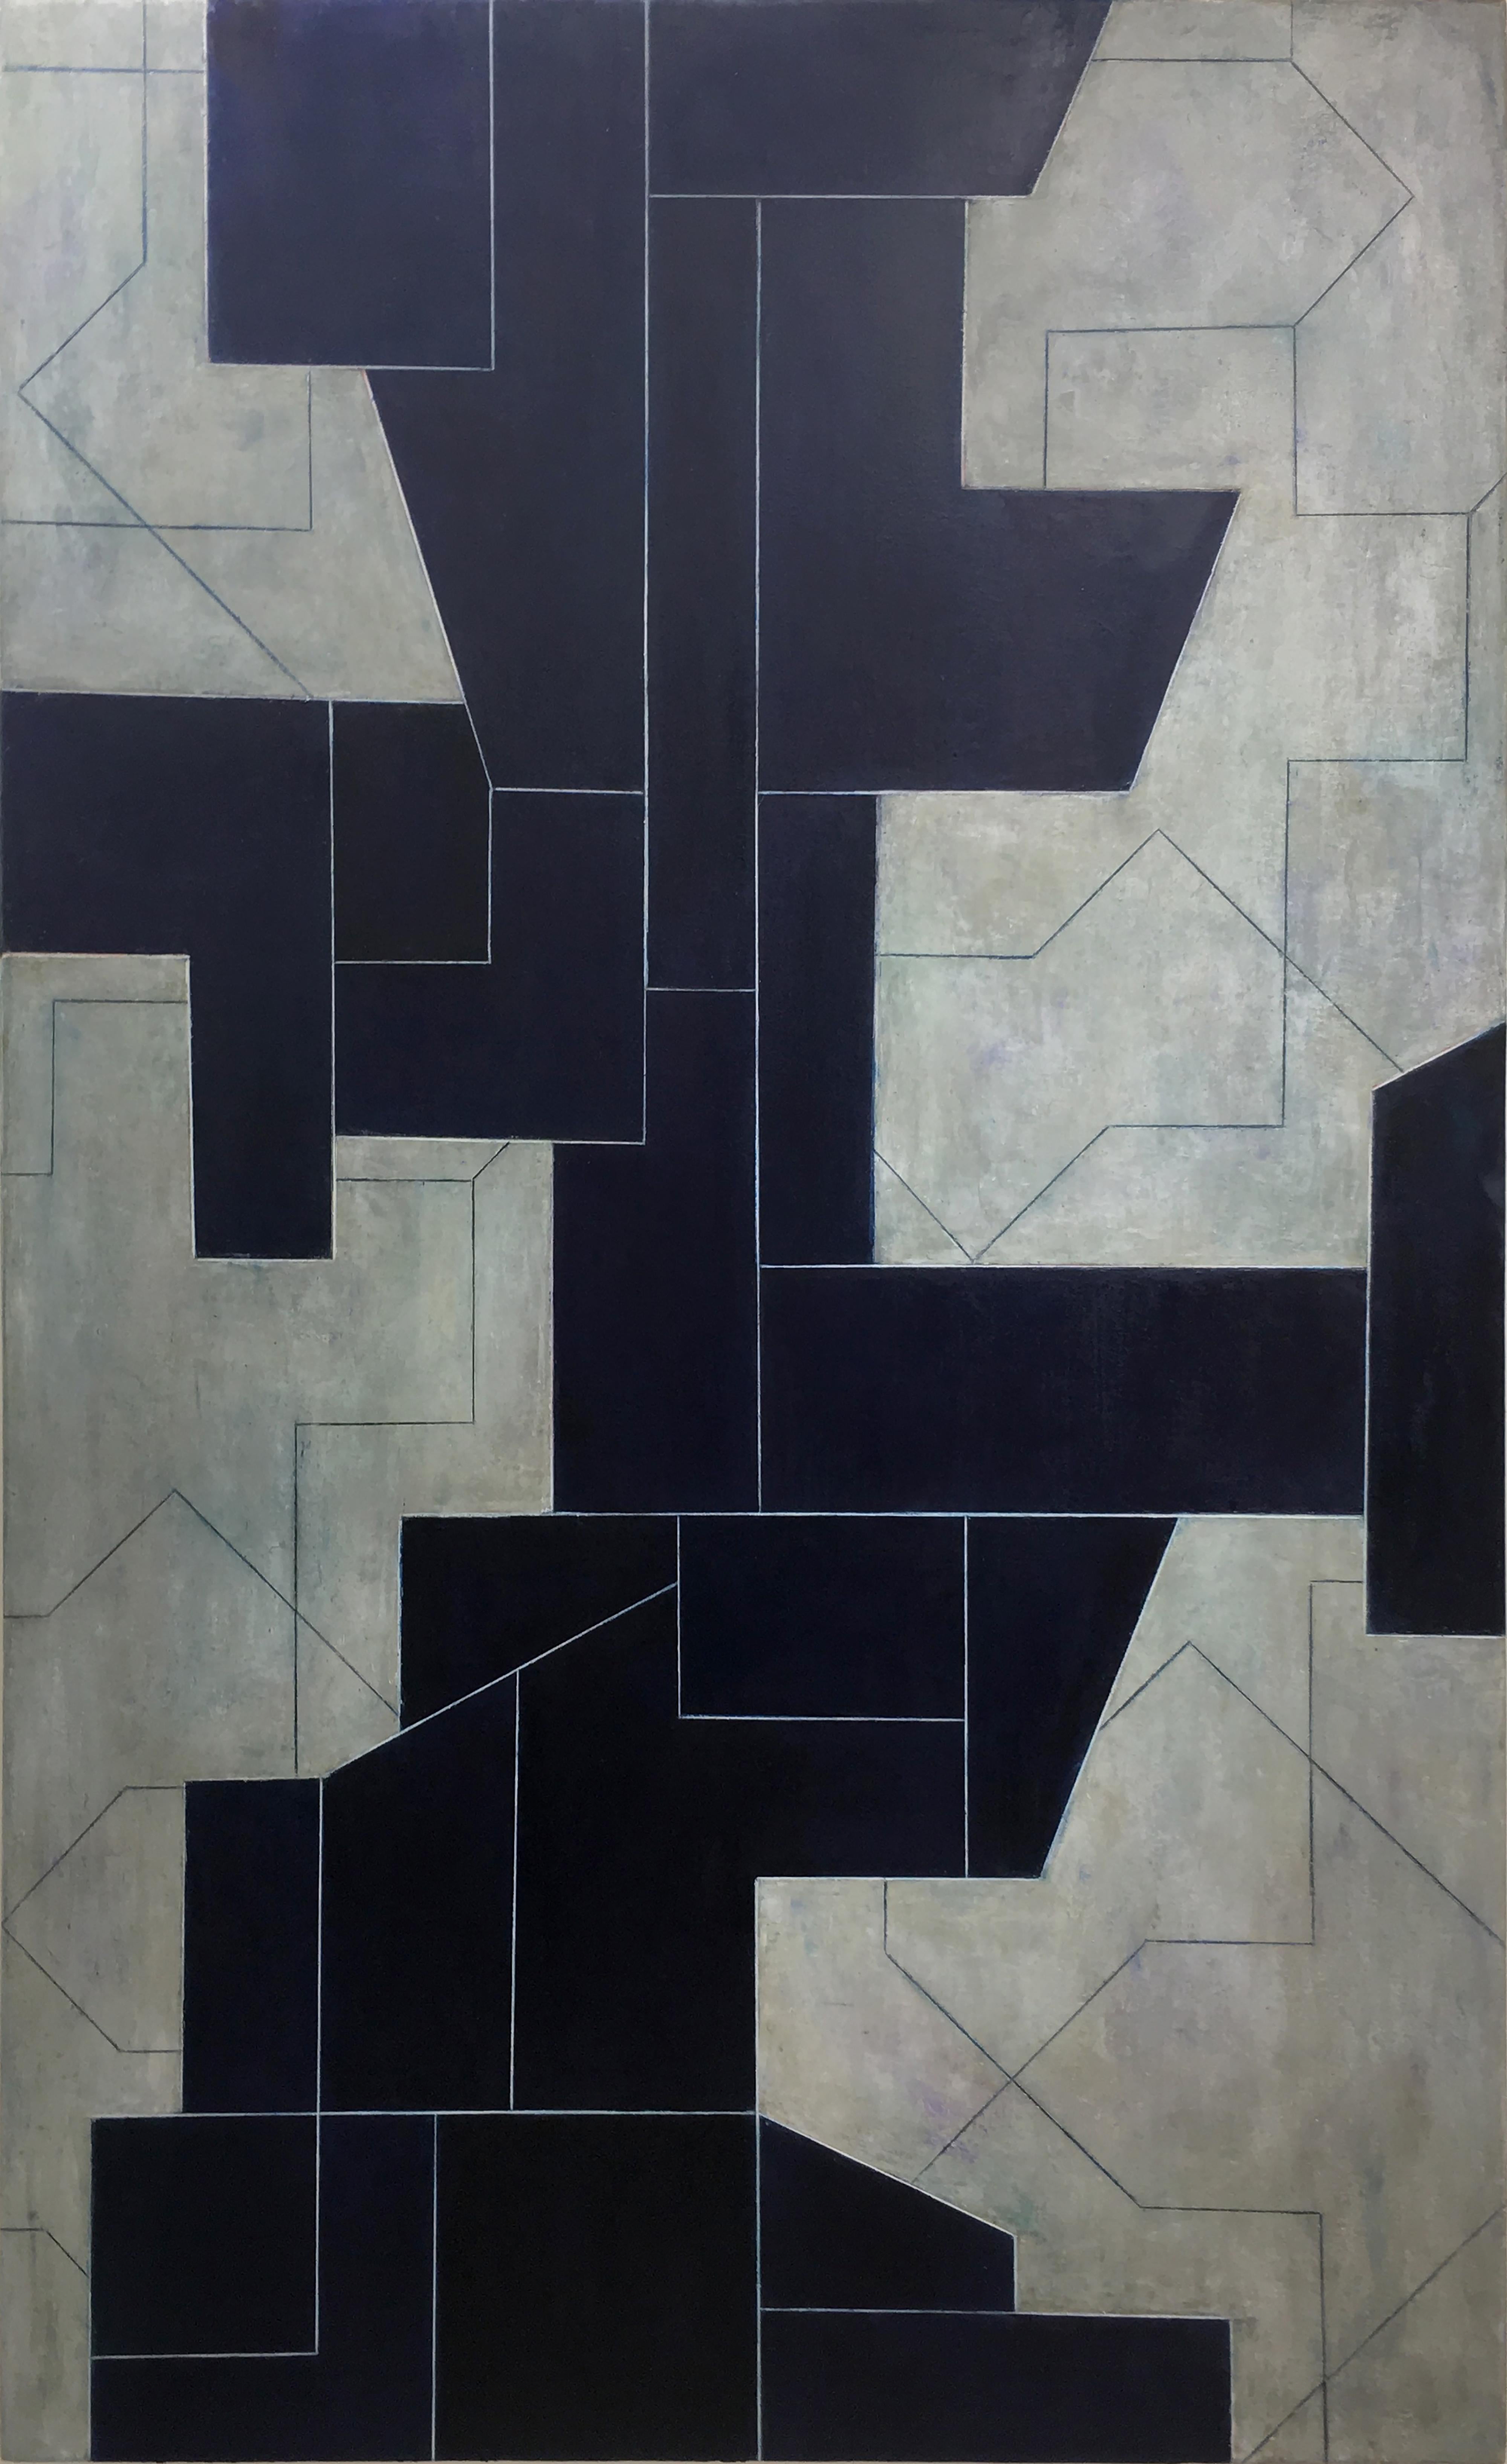 Stephen Cimini Abstract Painting - 78 x 48 x 3 in. "Mechanical Animal" - Large Oil Painting, Geometric Harmony